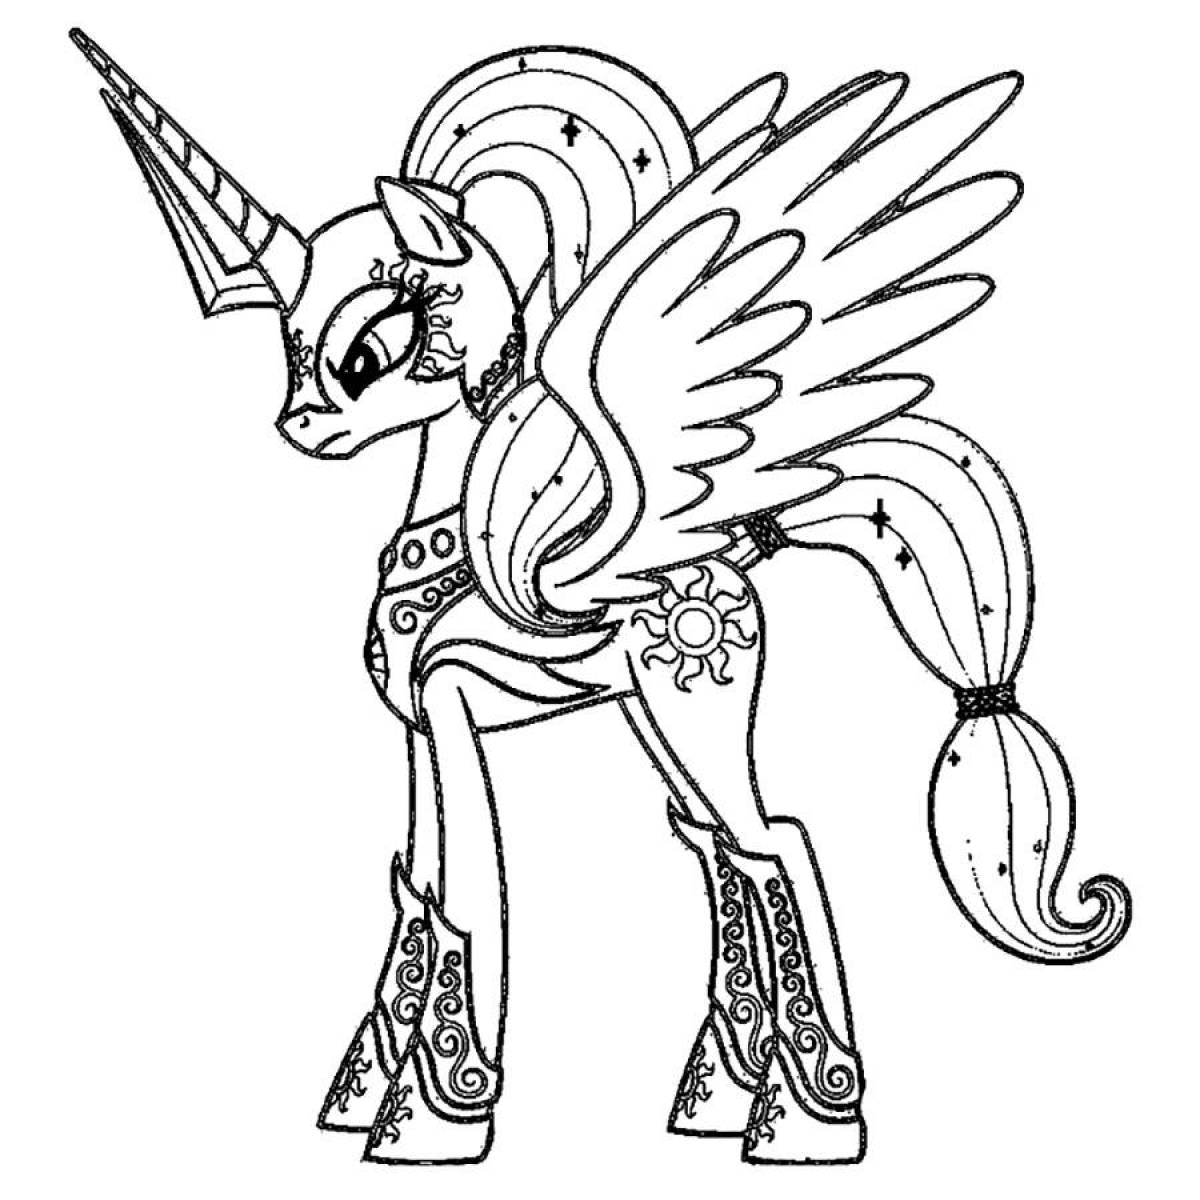 Malital pony coloring page with colorful splashes